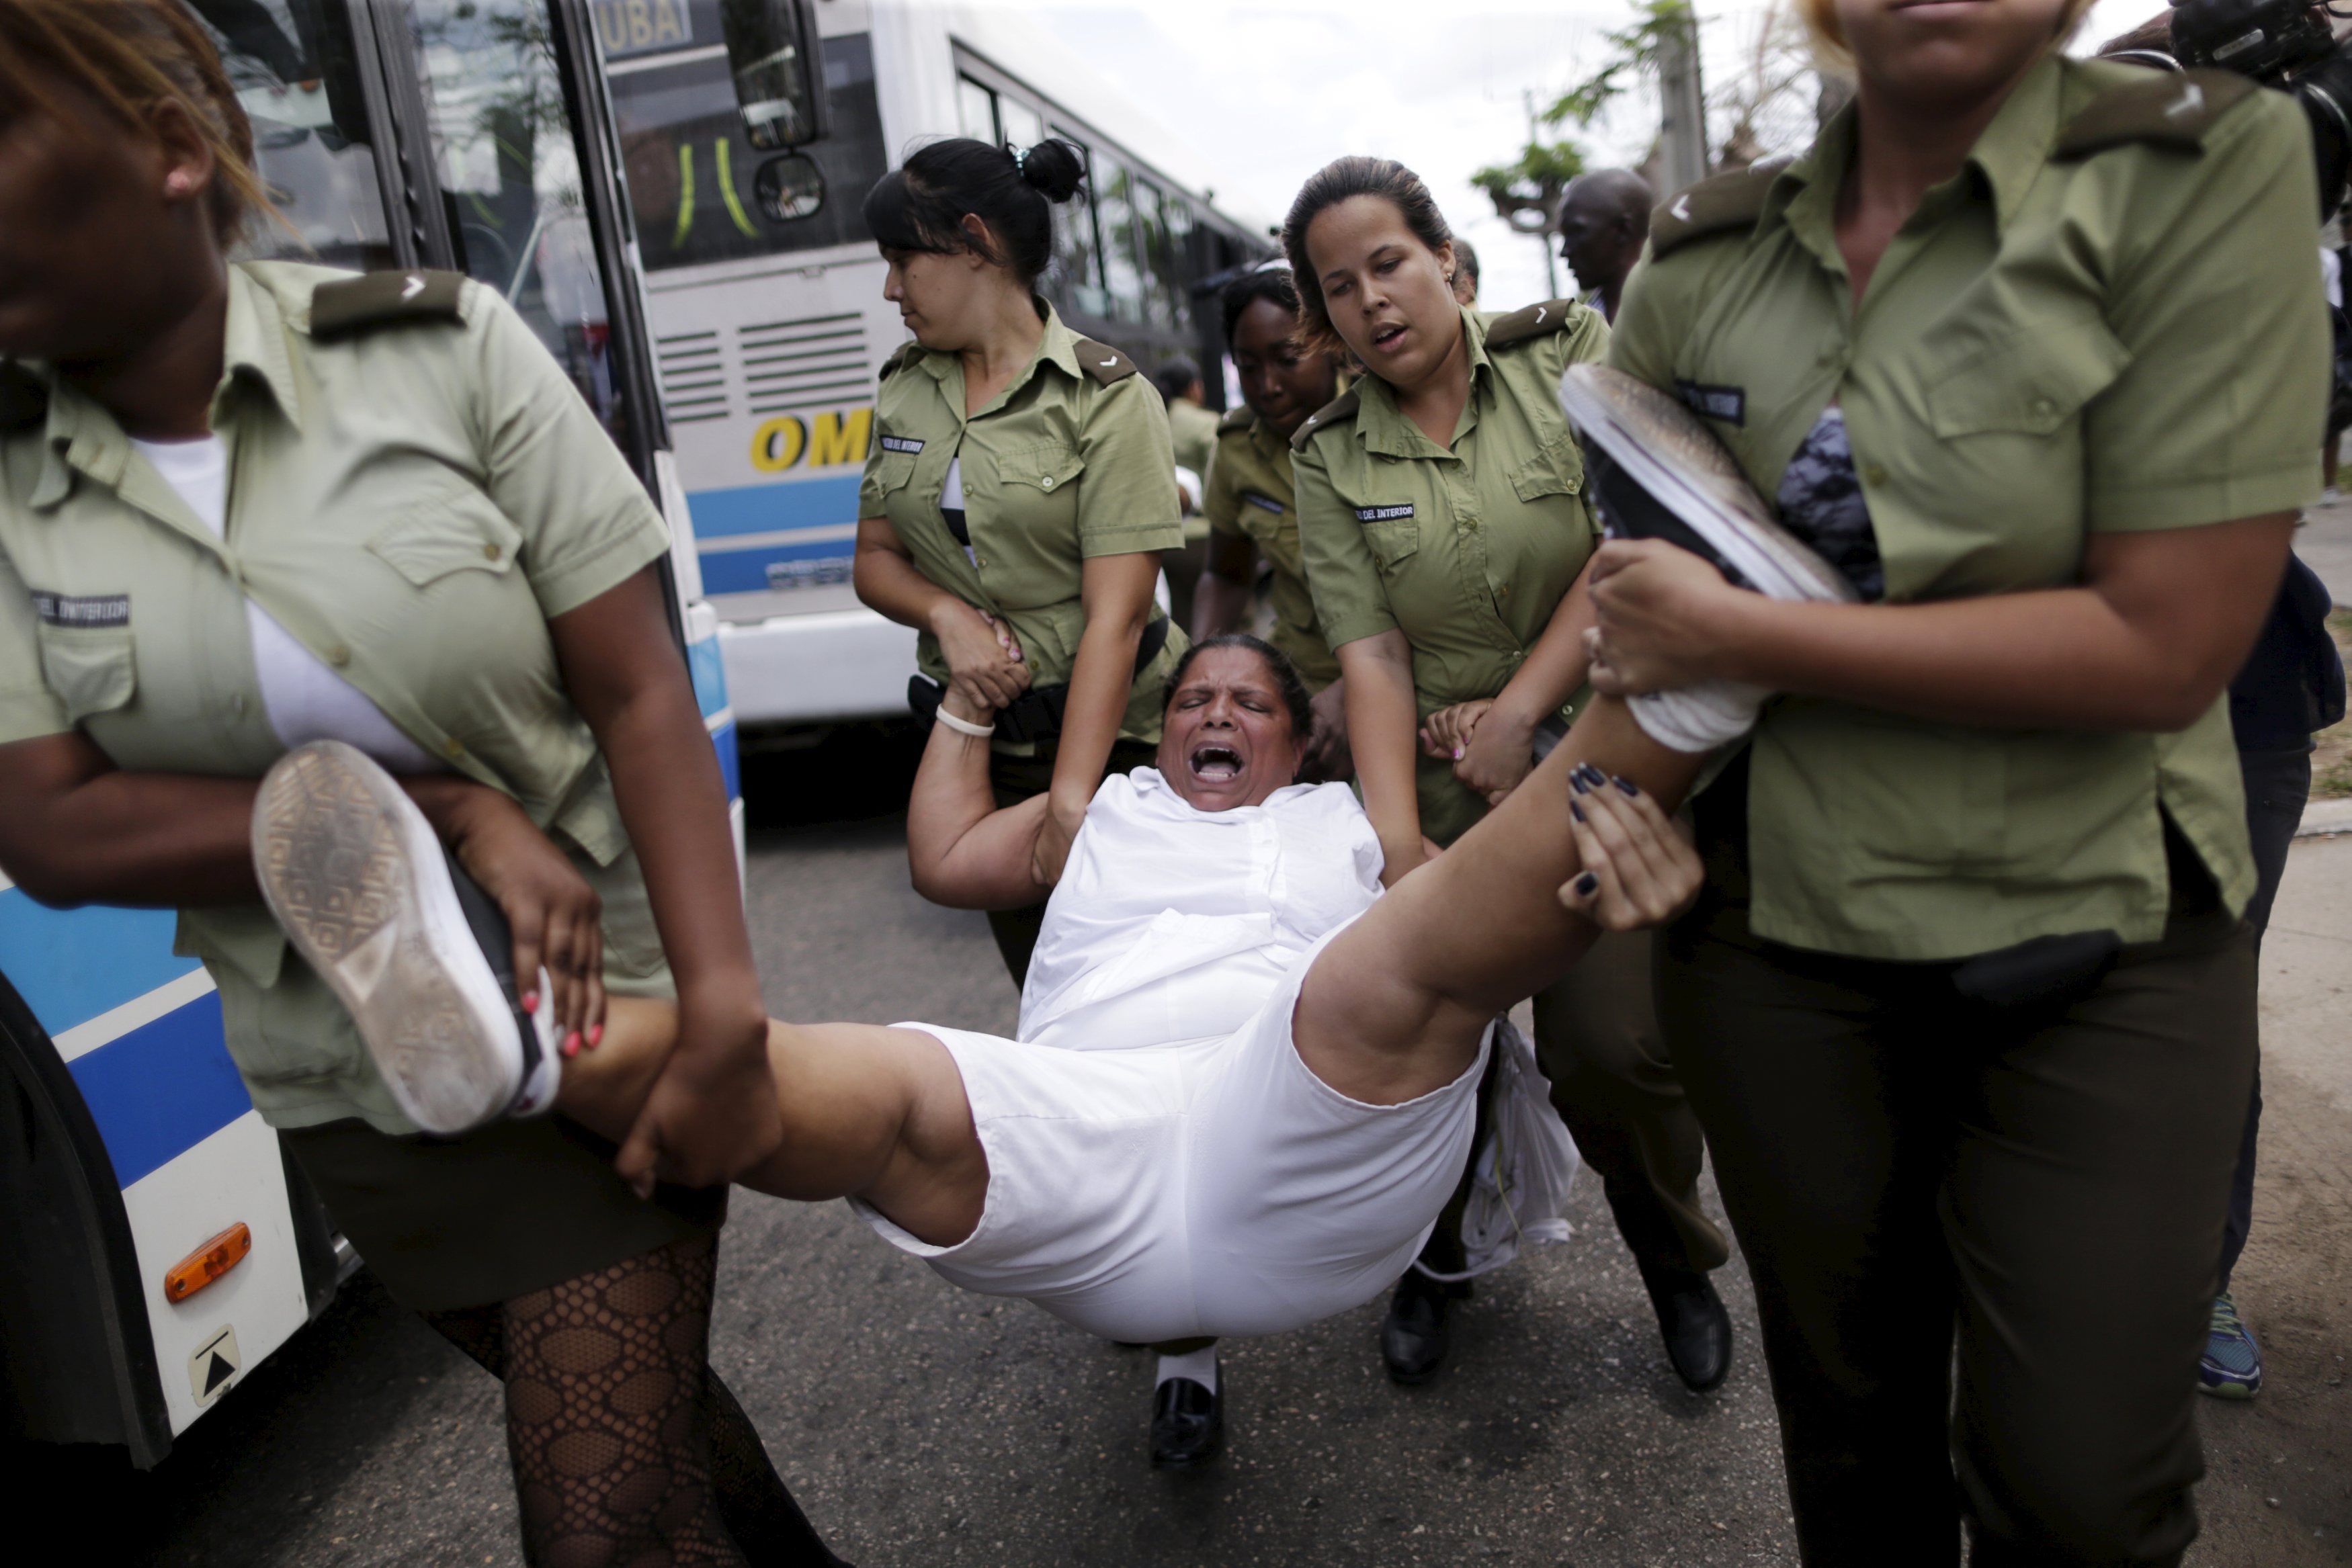 A member of the 'Ladies in White' dissident group shouts as she is carried away by police officers after they broke up a regular march of the group, detaining about 50 people, hours before U.S. President Barack Obama arrives for a historic visit, in Havana, Cuba March 20, 2016. REUTERS/Ueslei Marcelino TPX IMAGES OF THE DAY